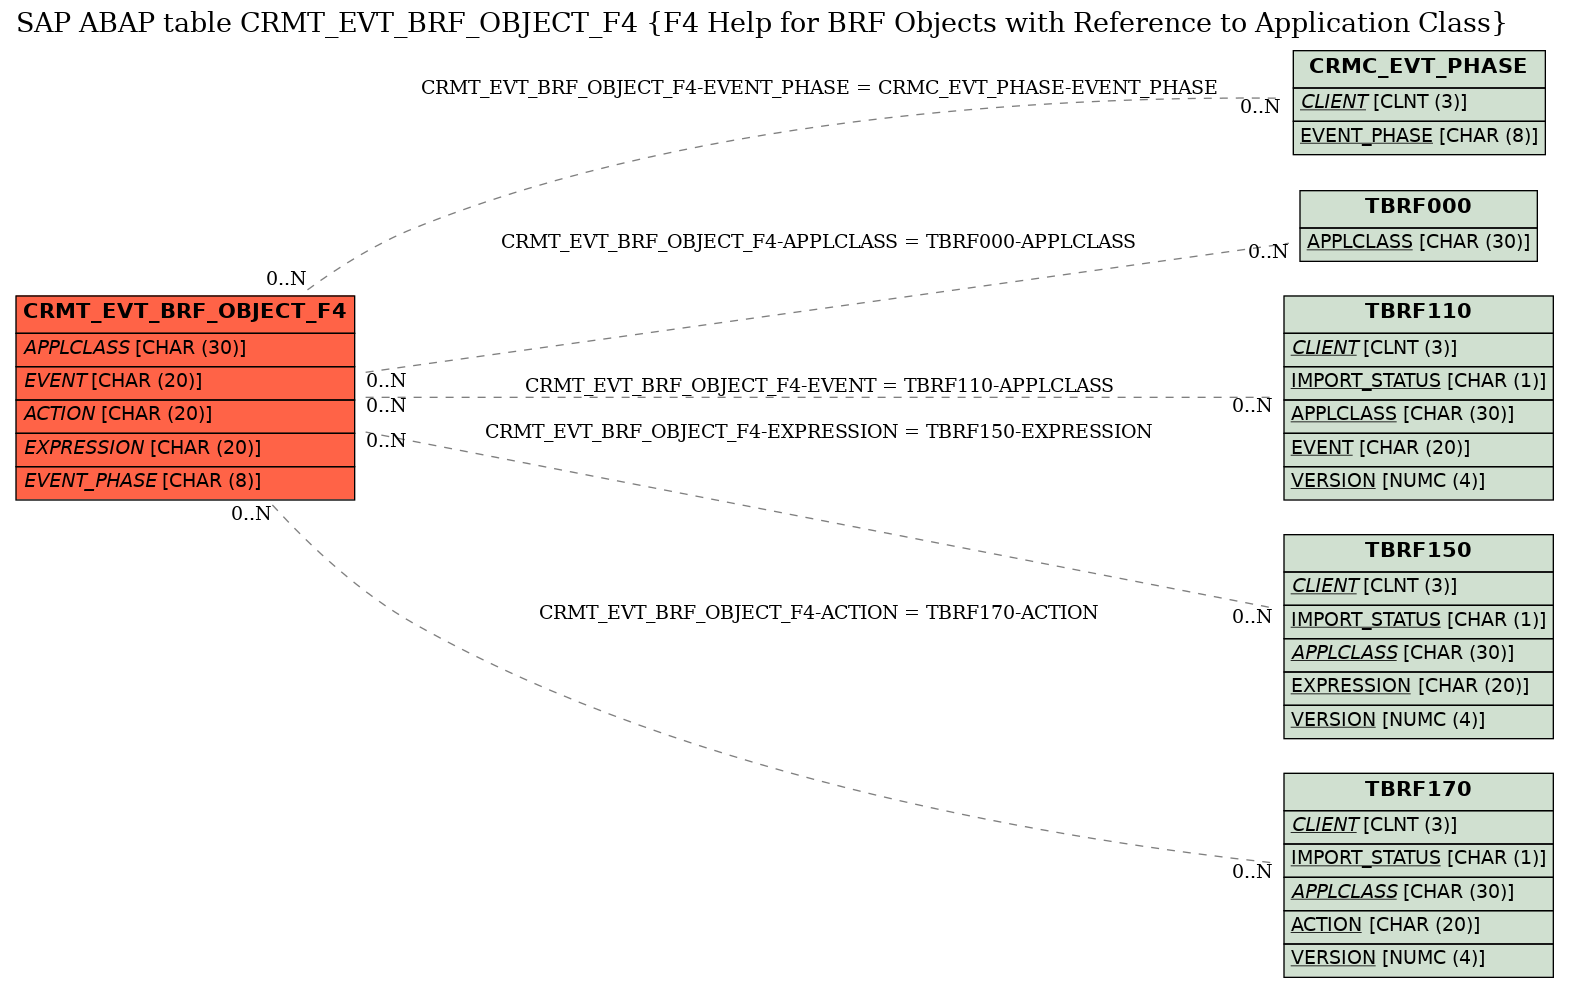 E-R Diagram for table CRMT_EVT_BRF_OBJECT_F4 (F4 Help for BRF Objects with Reference to Application Class)